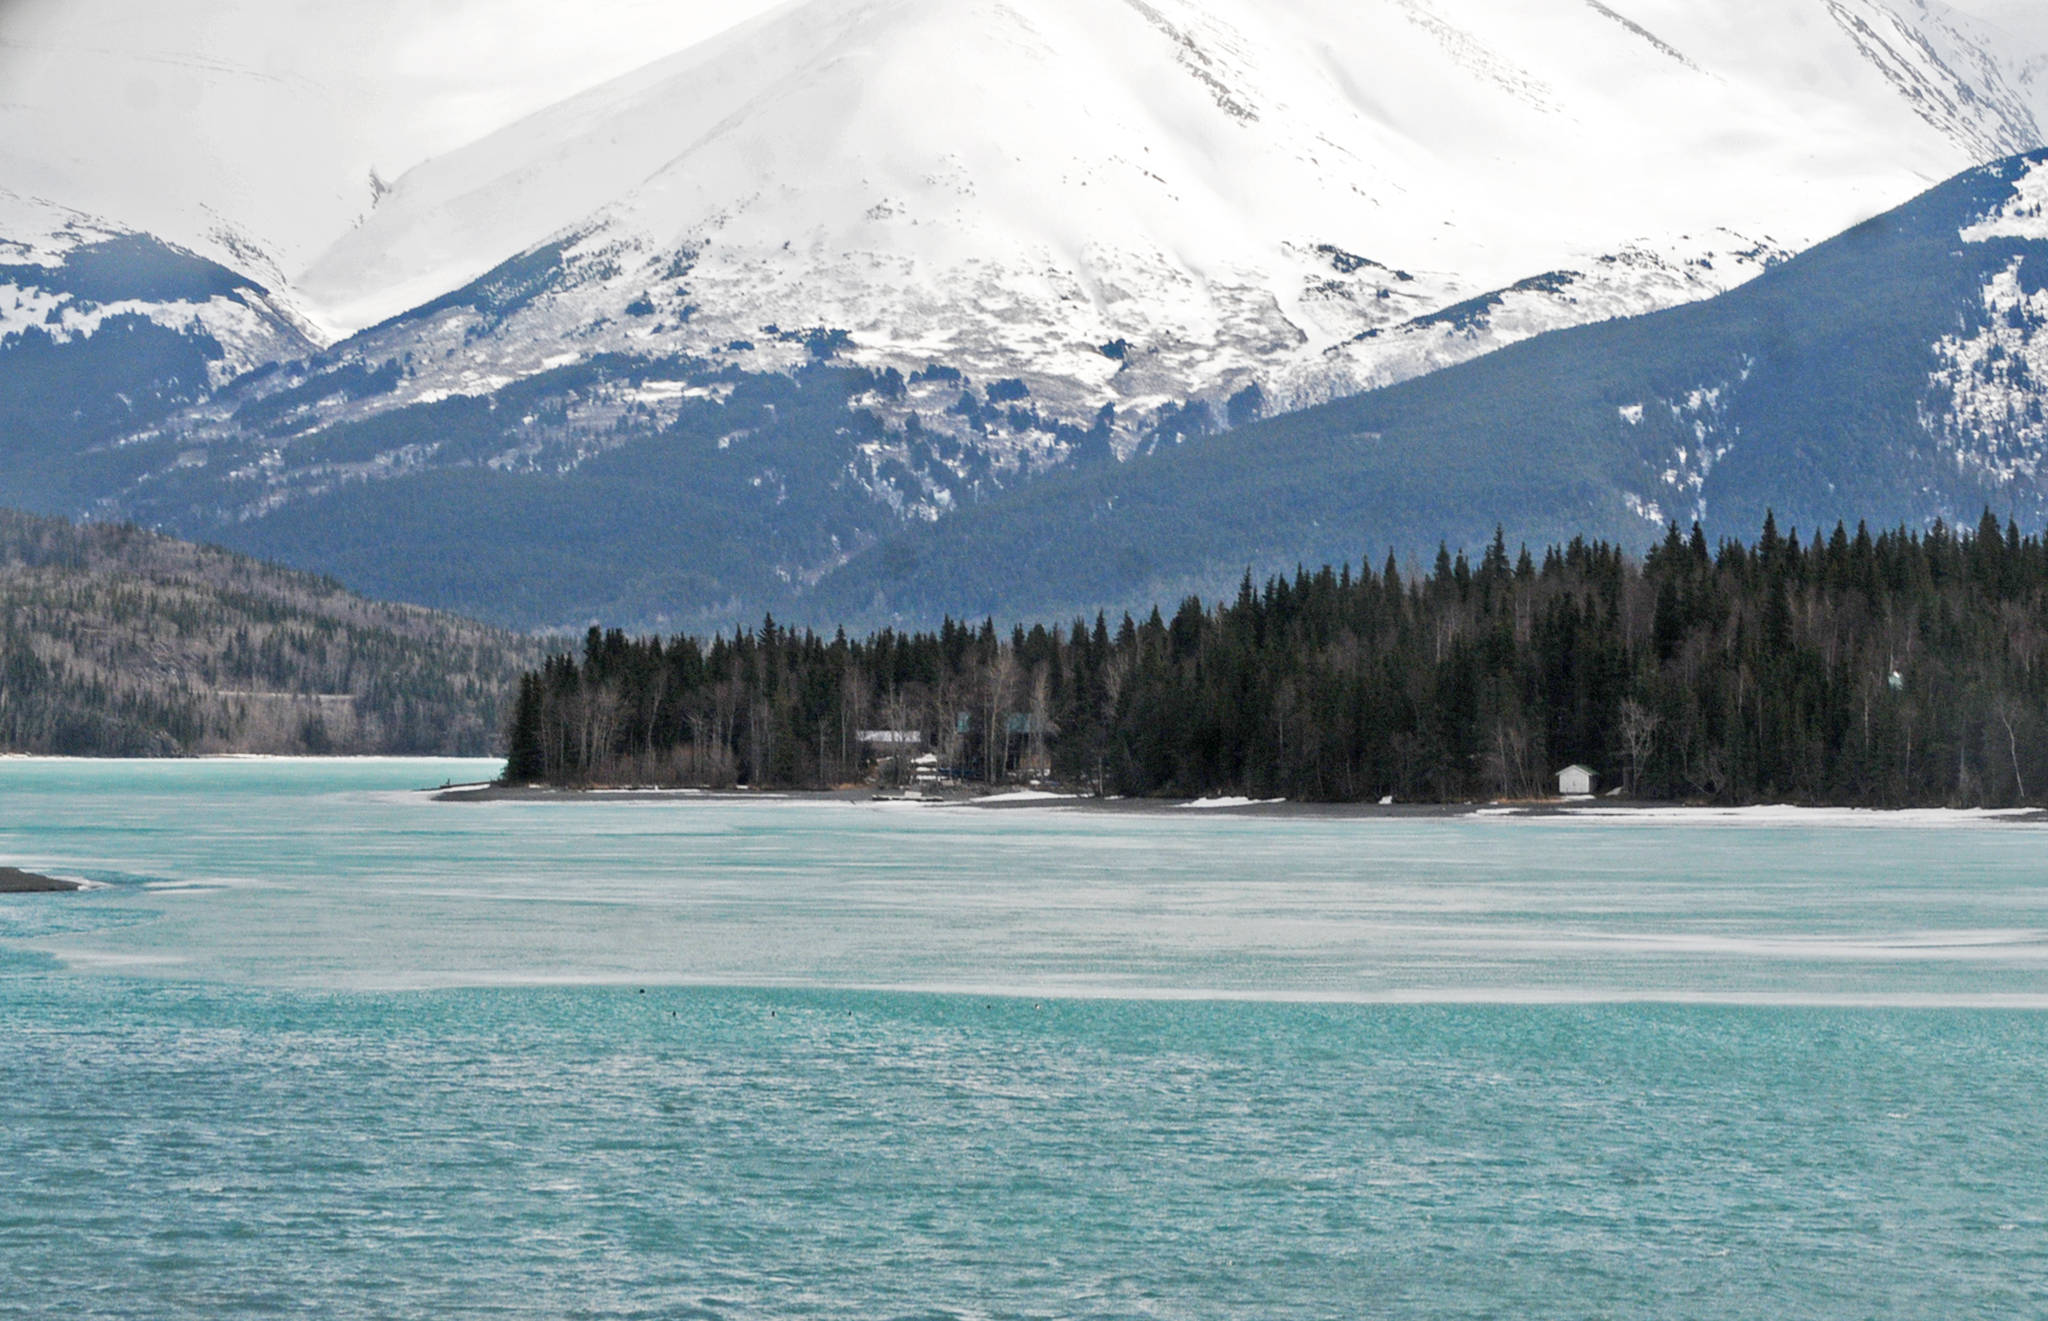 The mountains form the backdrop for Kenai Lake, which is still partially frozen, on Wednesday, April 11, 2018 seen from the bridge in Cooper Landing, Alaska. The Alaska Department of Environmental Conservation on Saturday cleaned up a small spill left over from a truck accident in February near the shore of the lake alongside the Sterling Highway. (Photo by Elizabeth Earl/Peninsula Clarion)